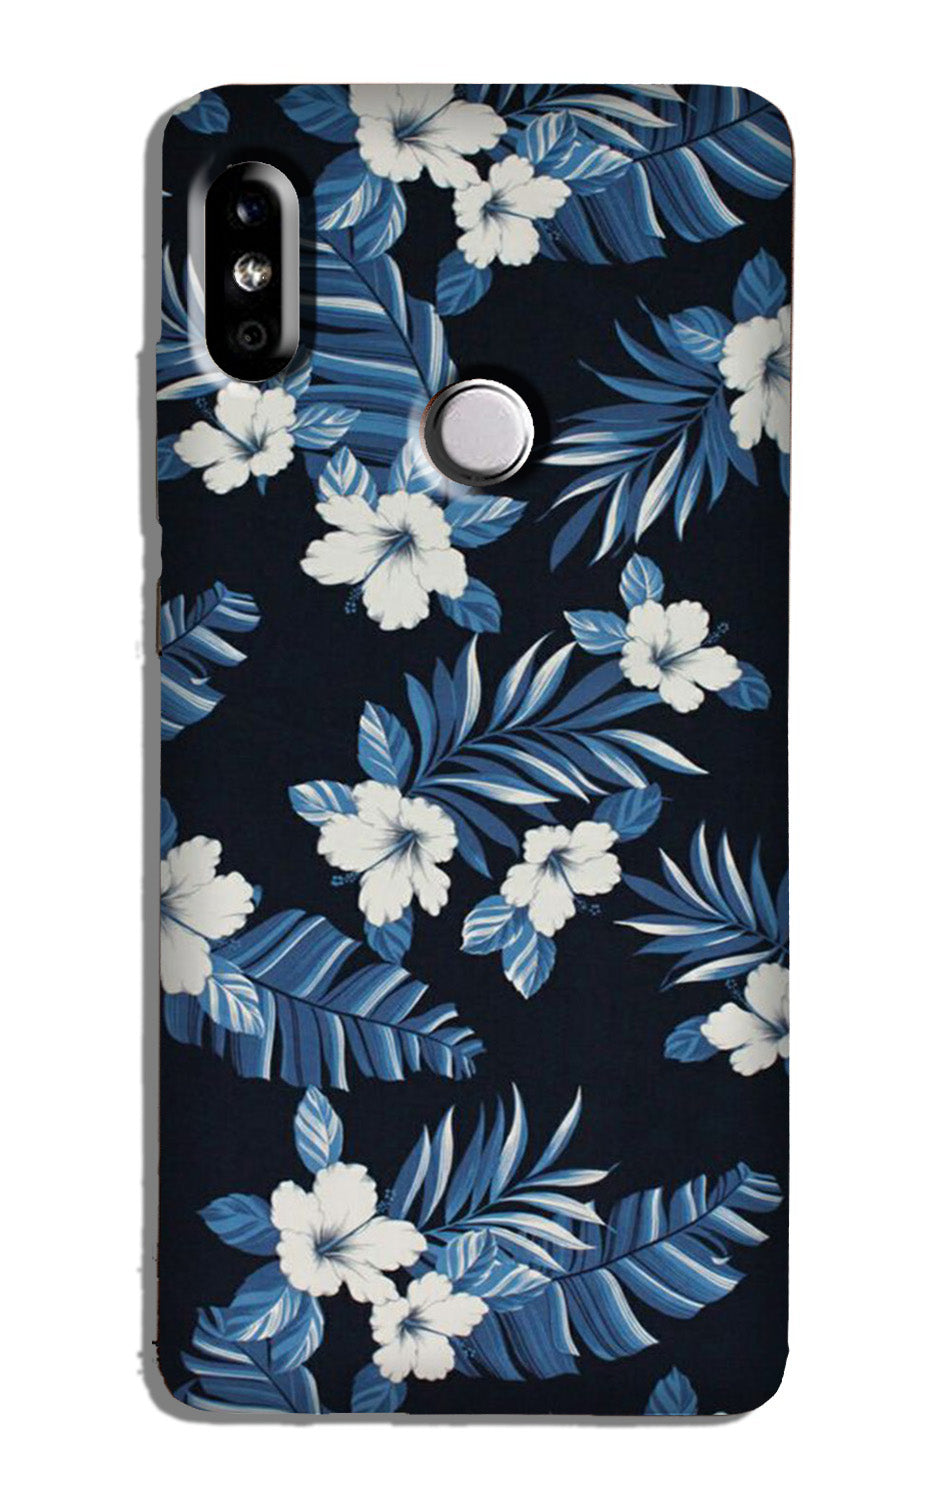 White flowers Blue Background2 Case for Redmi 6 Pro